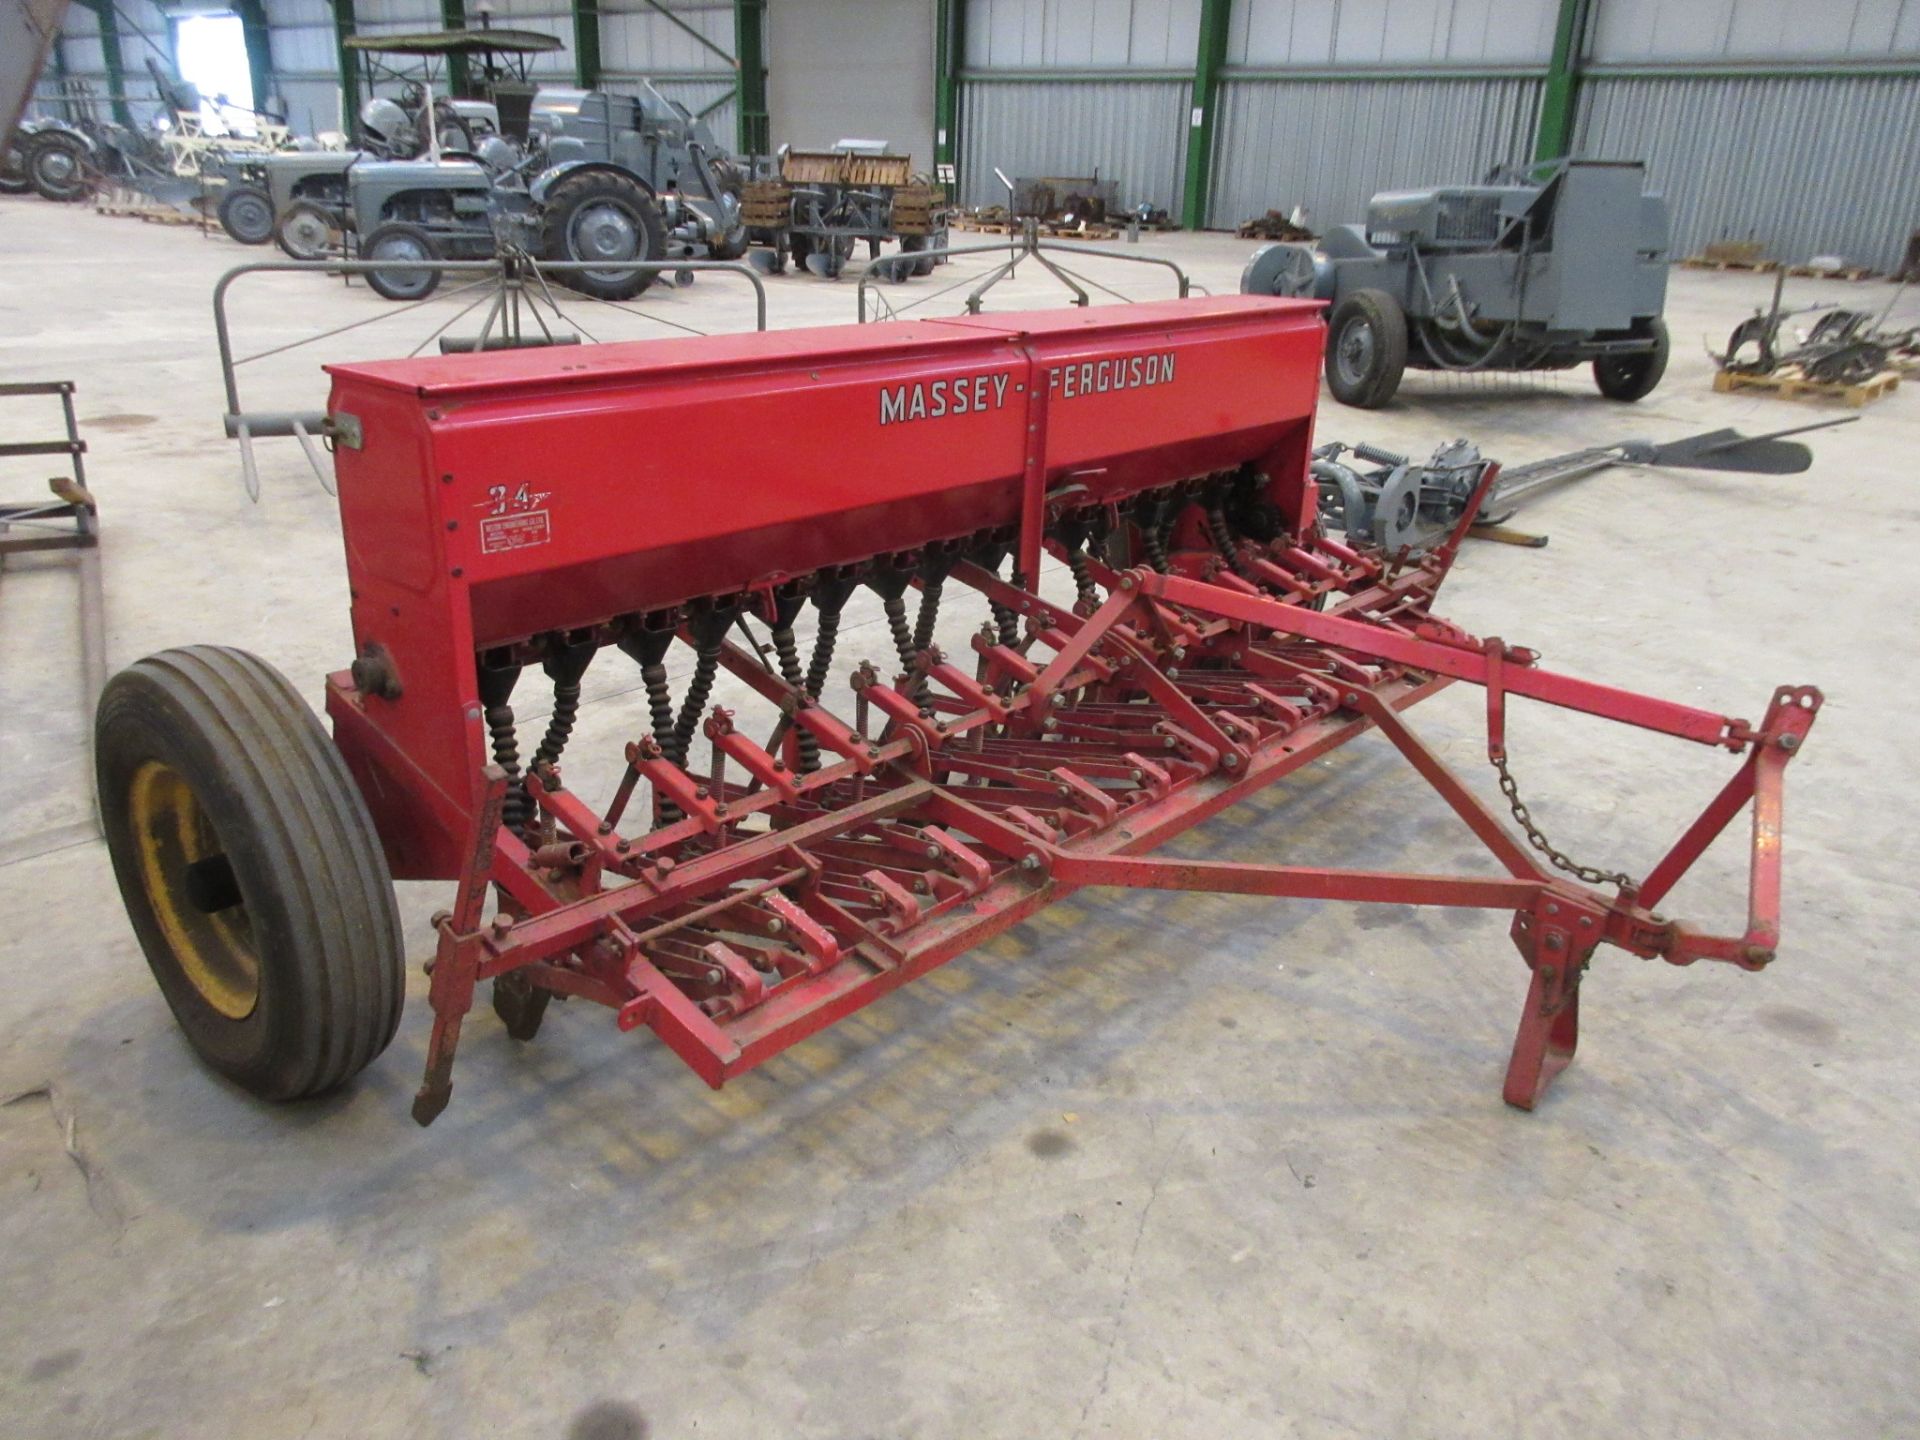 Massey Ferguson 34-7 trailed drill in very good original ex-farm condition with bout markers.